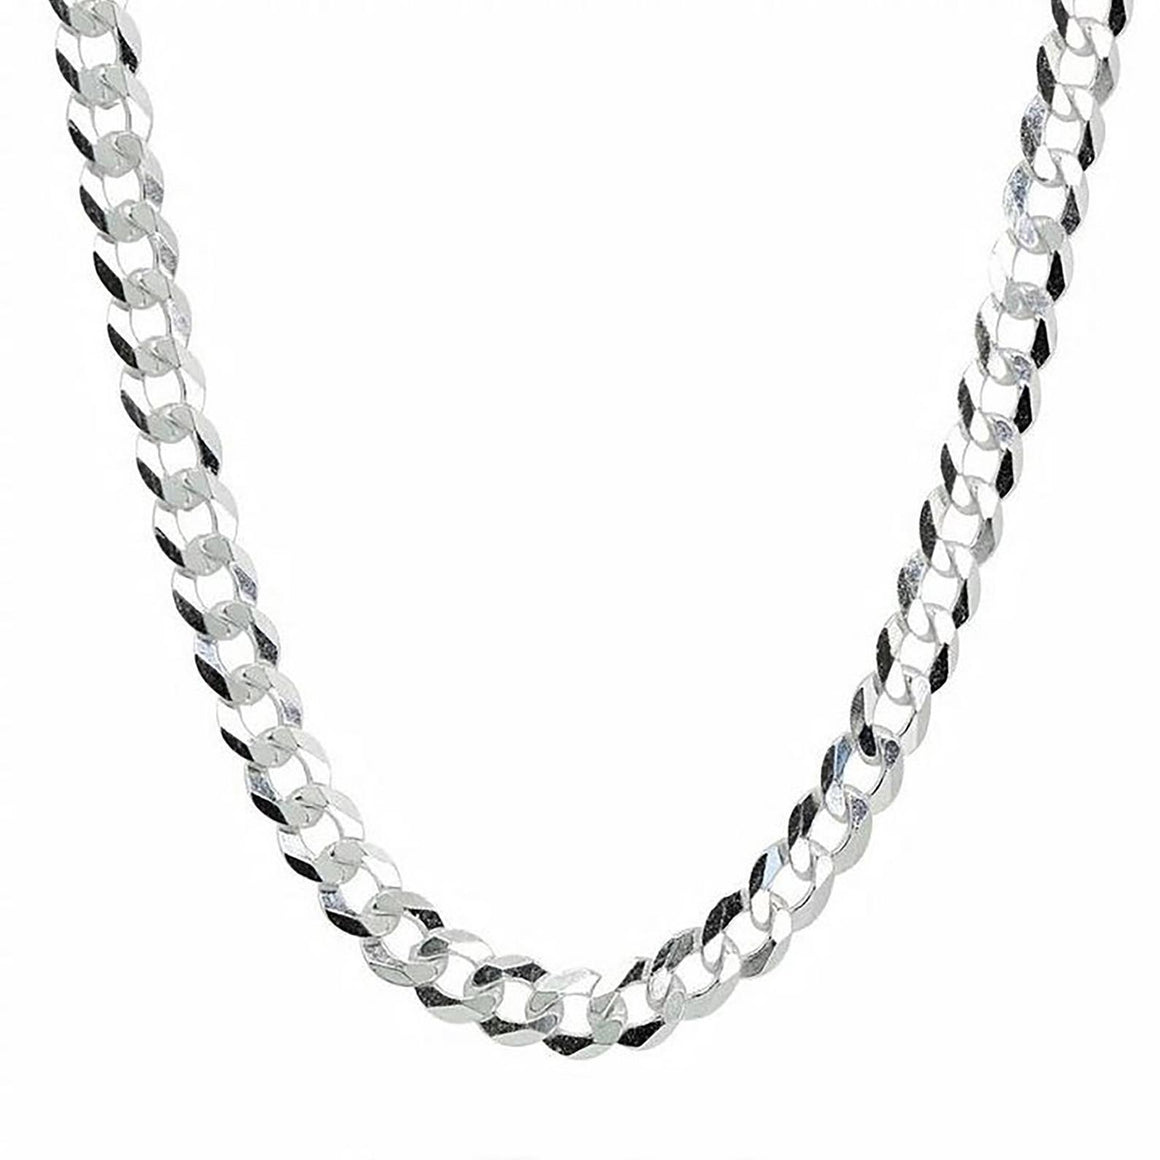 54 FLORAL 10mm CURB 925 STERLING SILVER NECKLACE CHAIN